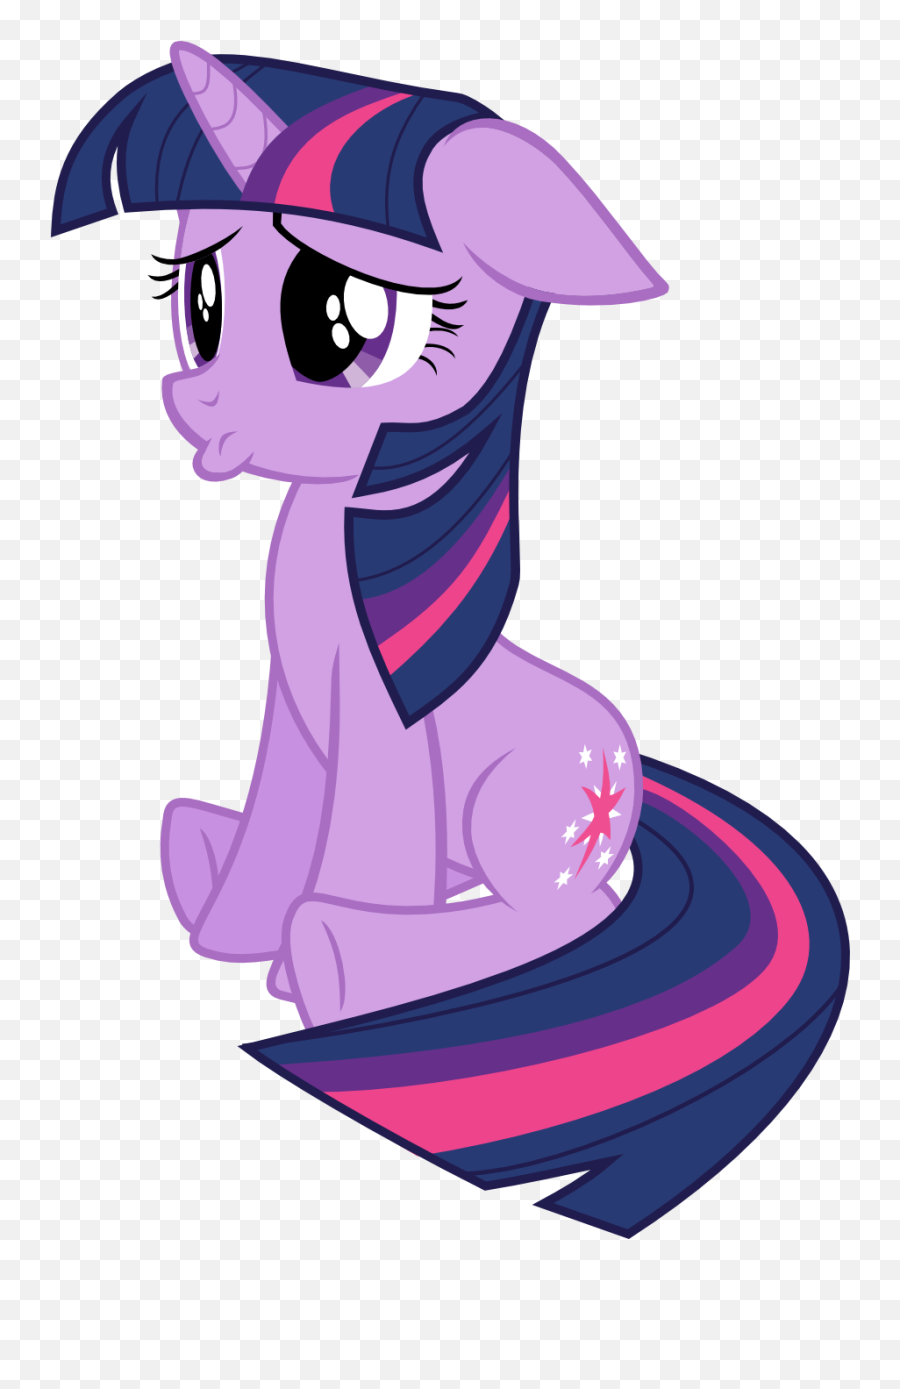 The Adorable Game - Page 4 Forum Games Mlp Forums Fictional Character Emoji,Chinchilla Emoji